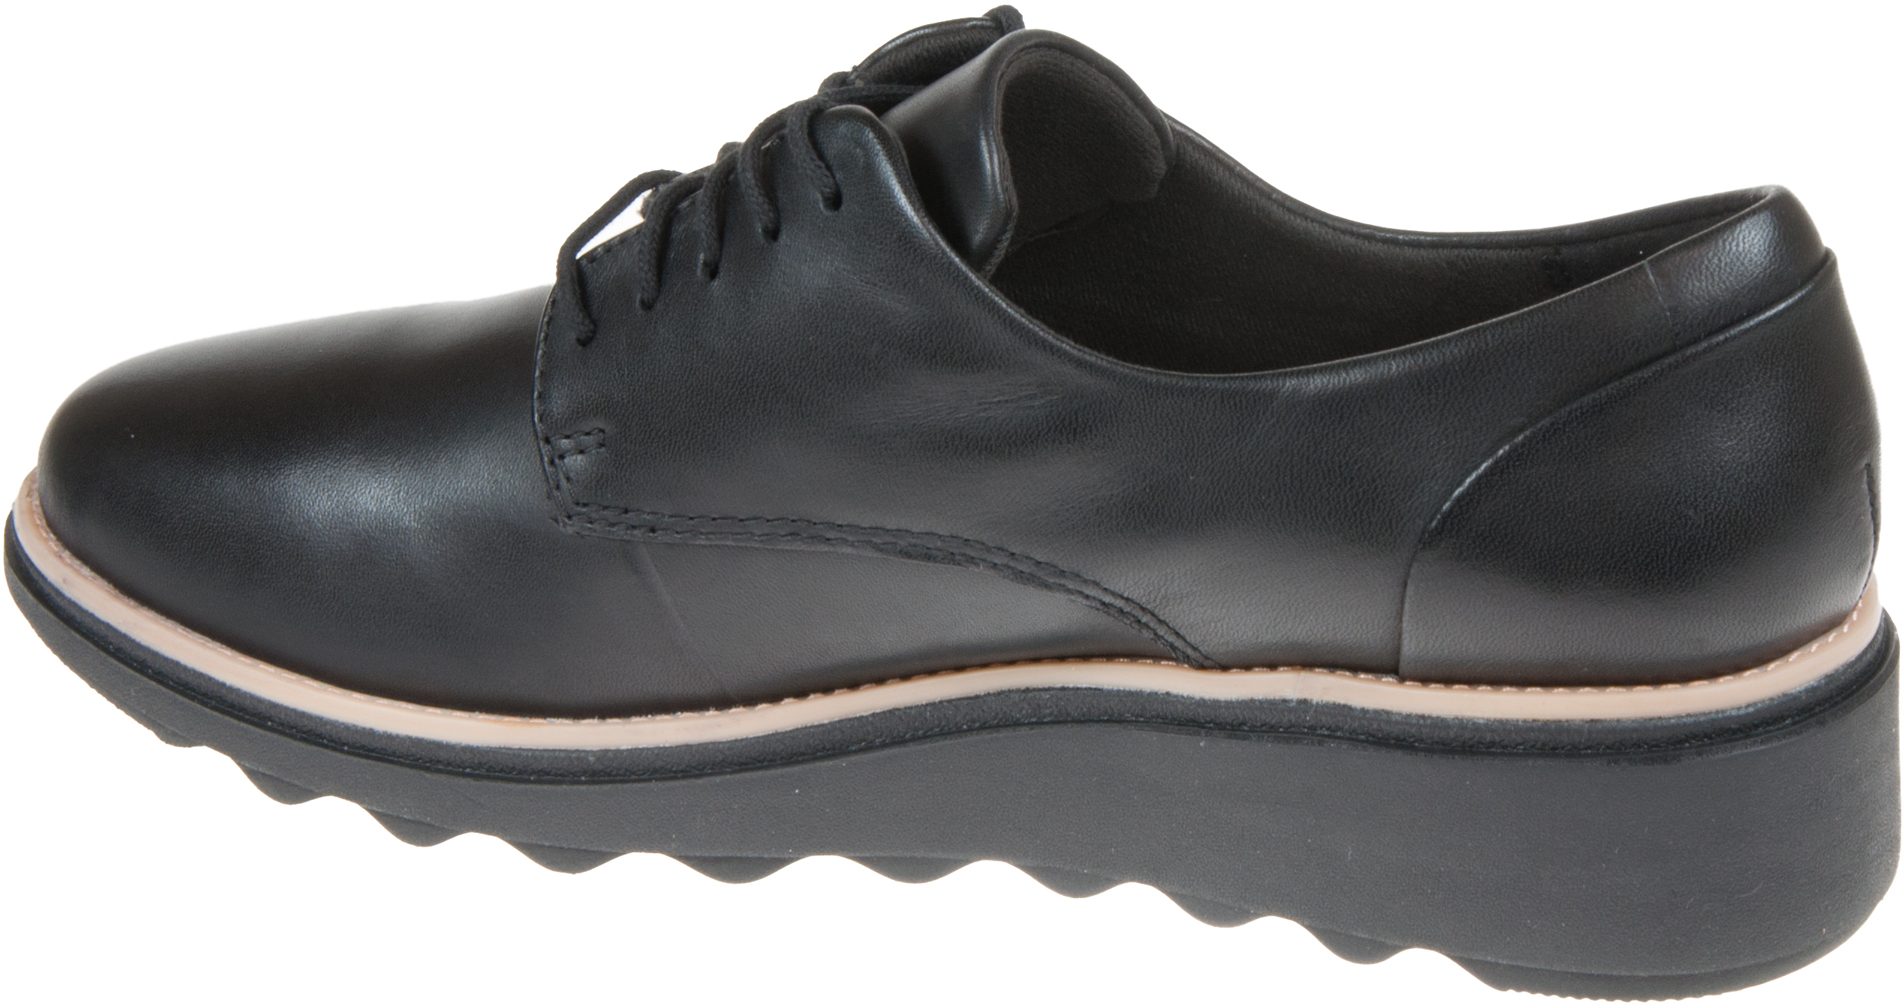 Clarks Sharon Noel Black Leather 26139075 - Everyday Shoes - Humphries ...